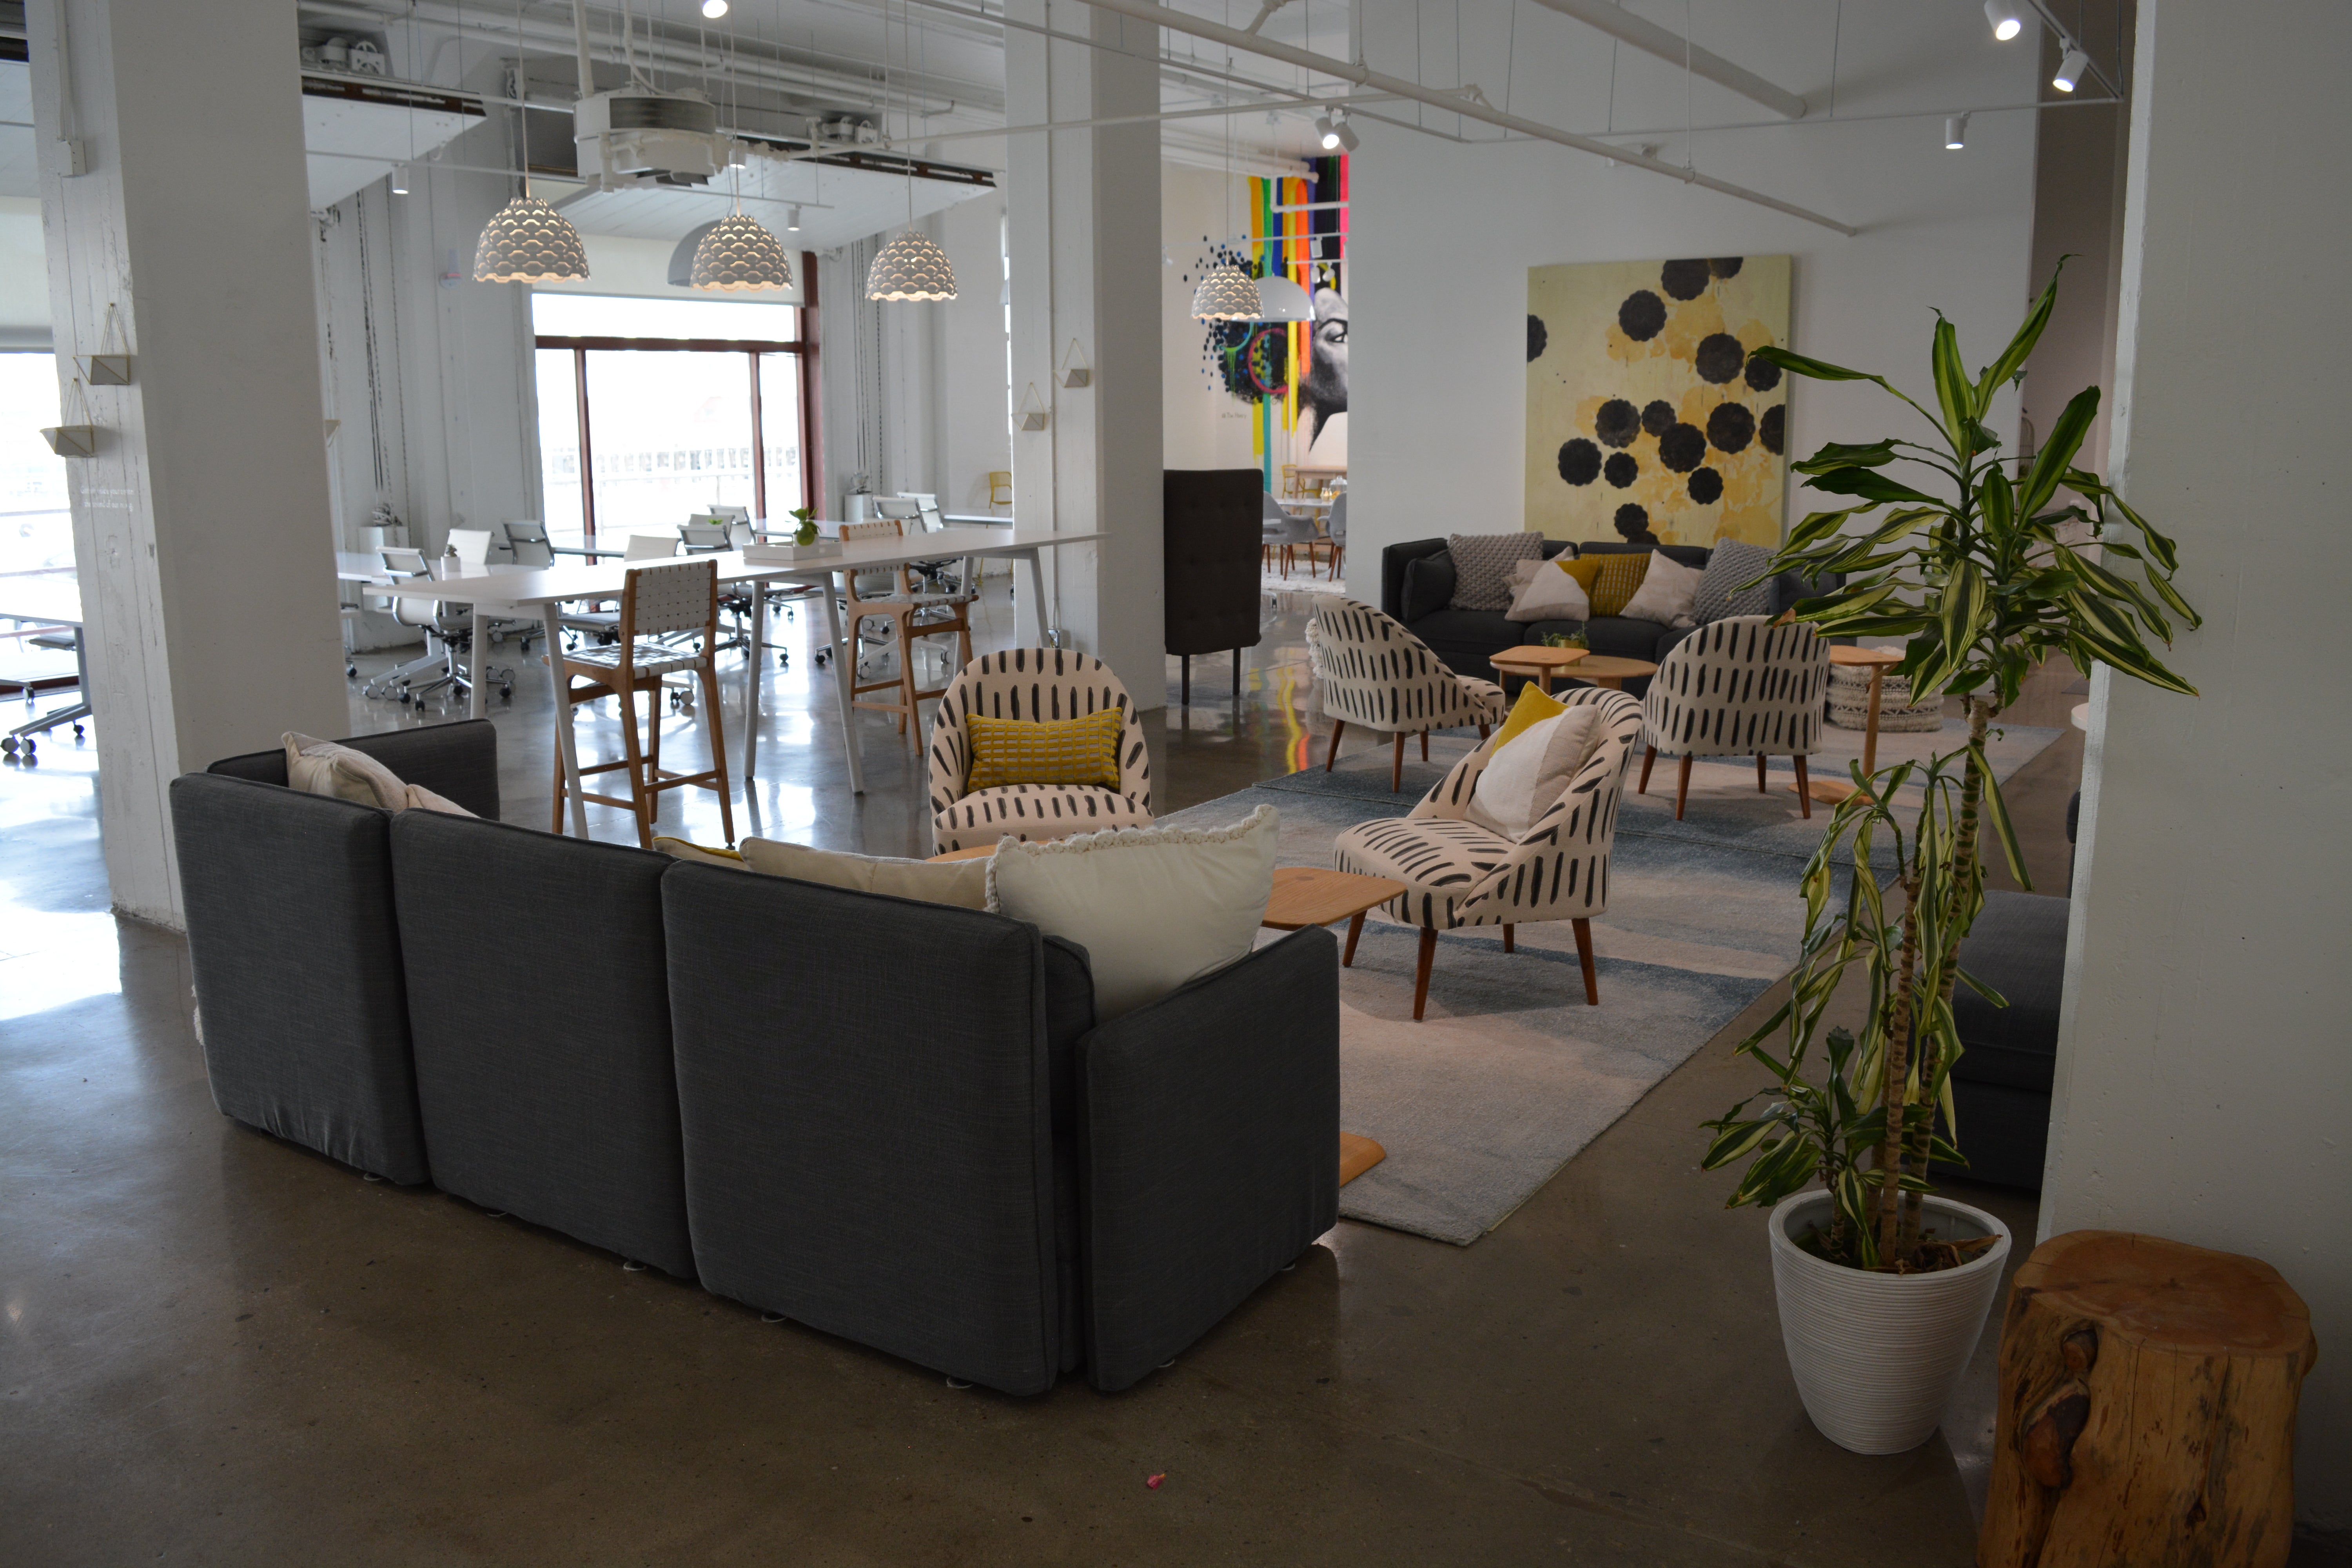 The empty offices of The Hivery, a San Francisco coworking space that reopens next month.